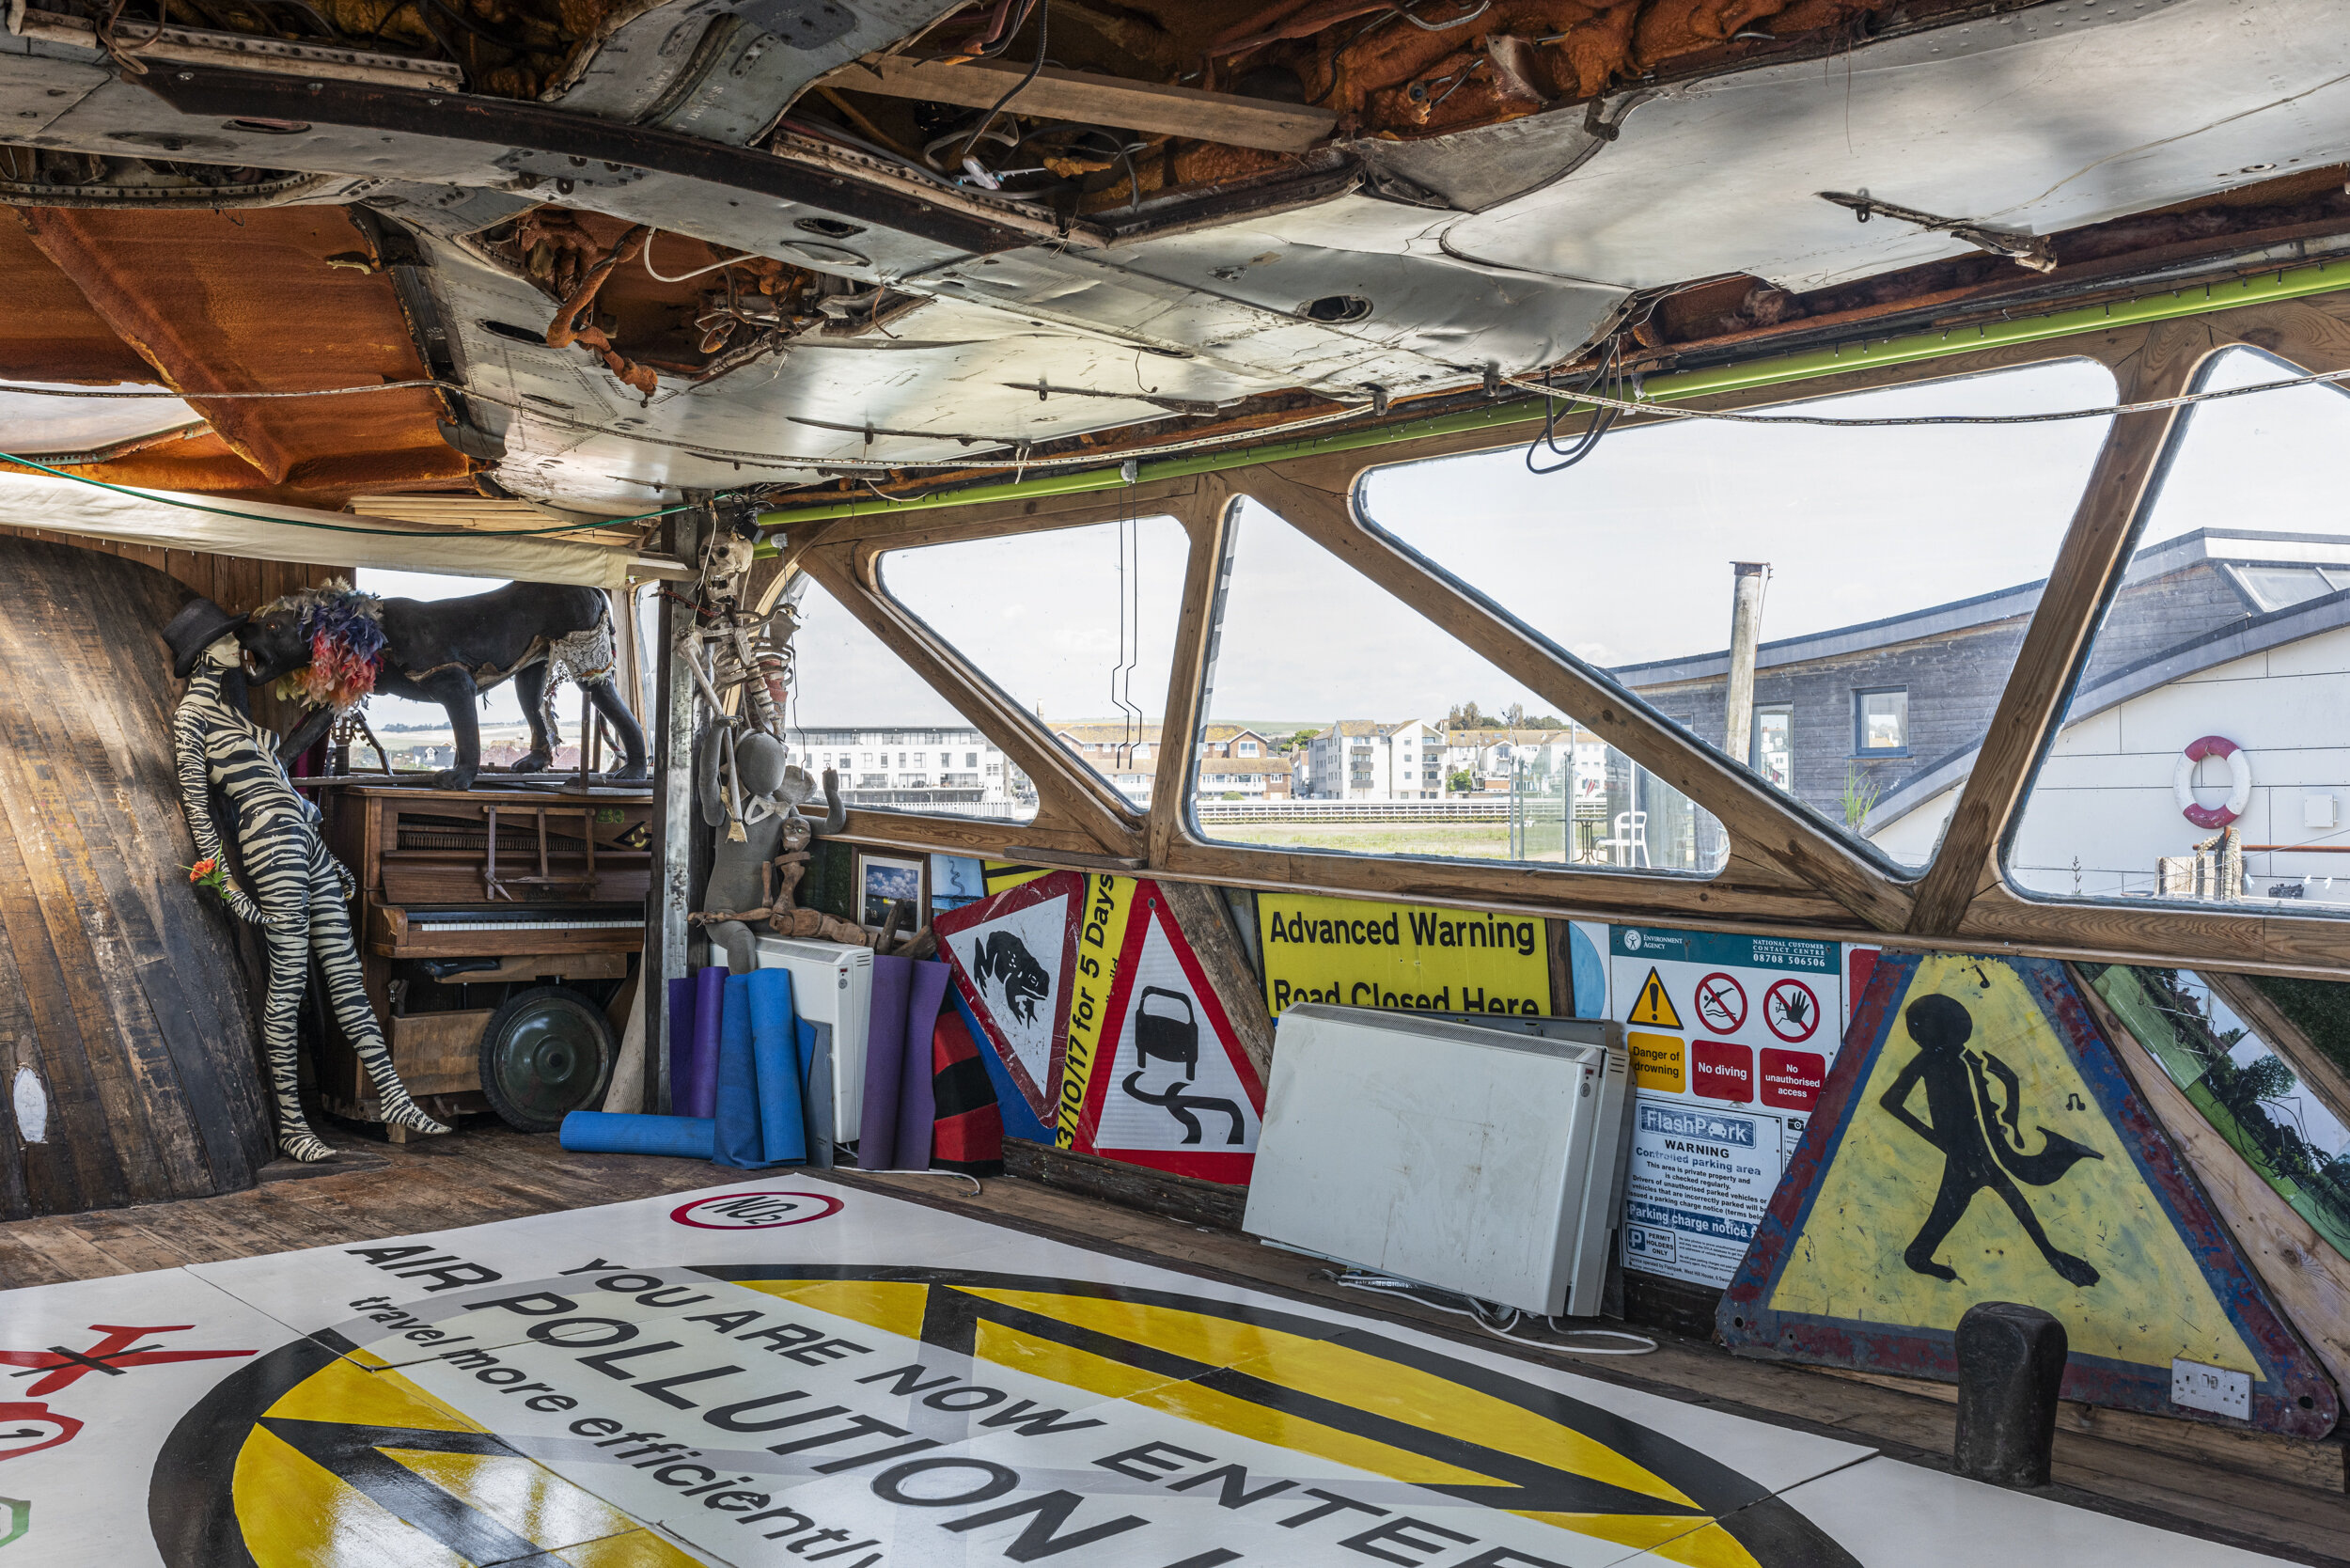 23 Shoreham Boatyard - Shoreham by Sea - East Sussex - Hamish McKenzie - The Keepers Project - David Clegg -Thierry Bal.jpg